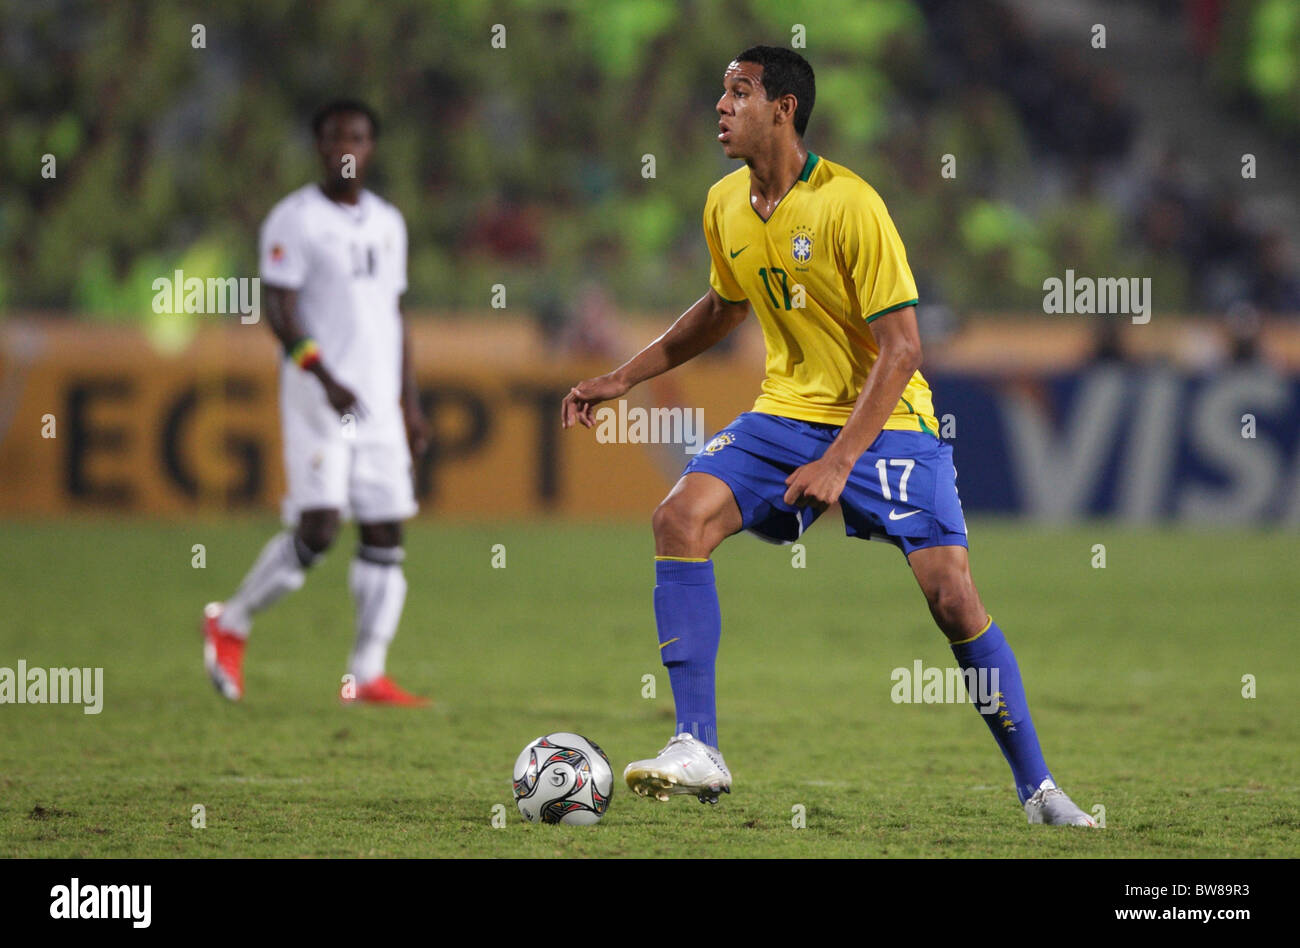 Souza of Brazil in action during the FIFA U-20 World Cup final against Ghana October 16, 2009 Stock Photo